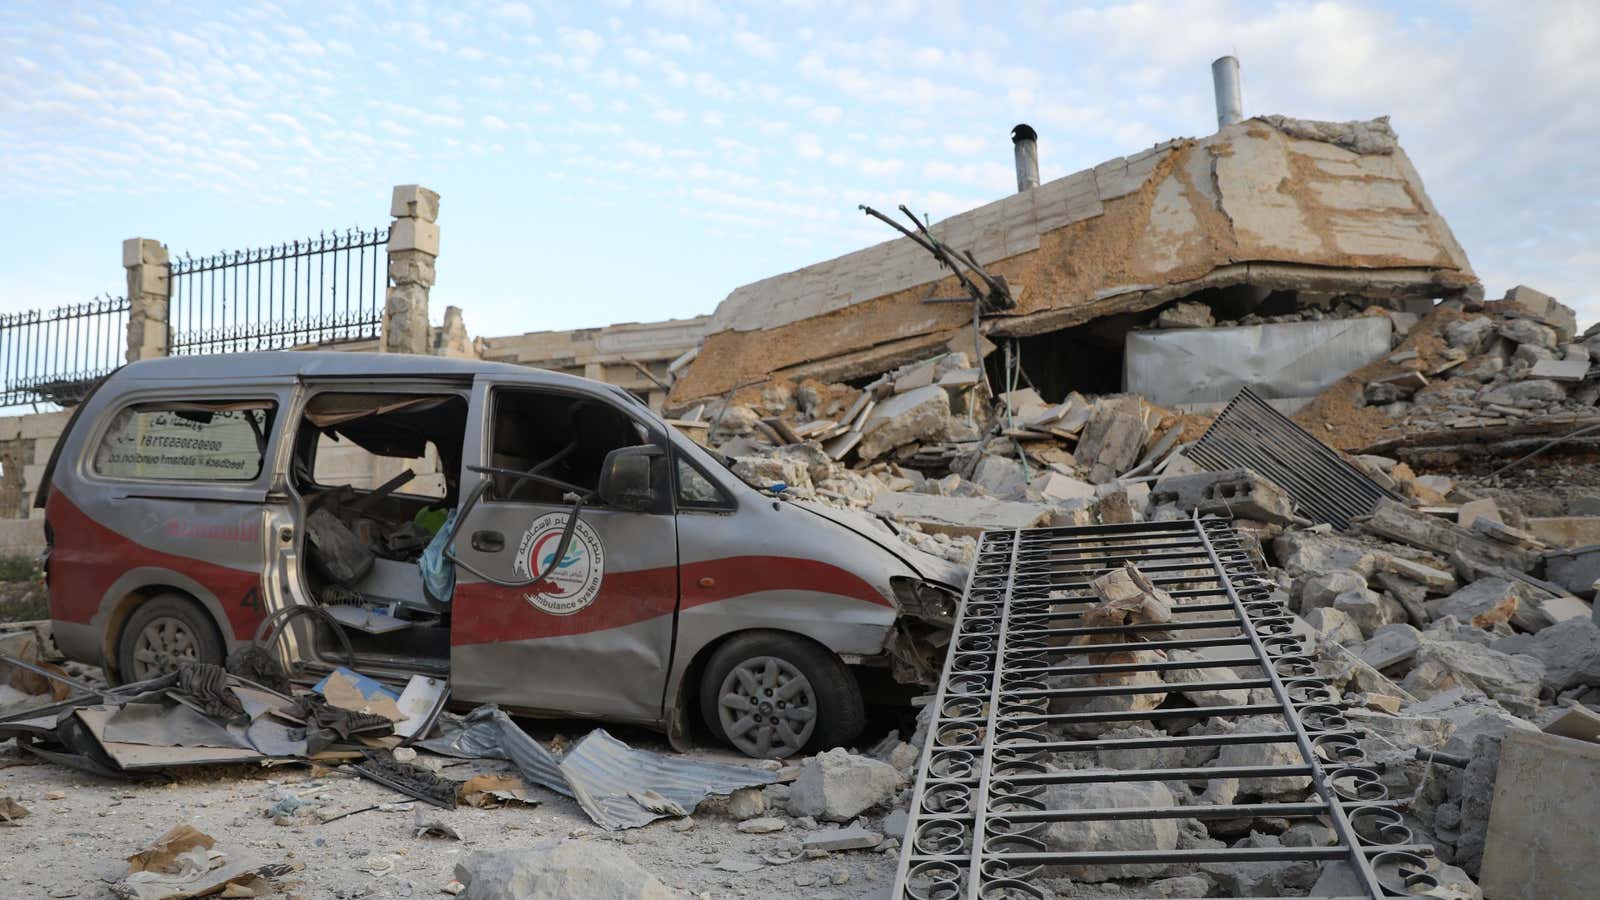 The aftermath of an attack on a hospital in Syria’s Idlib province.